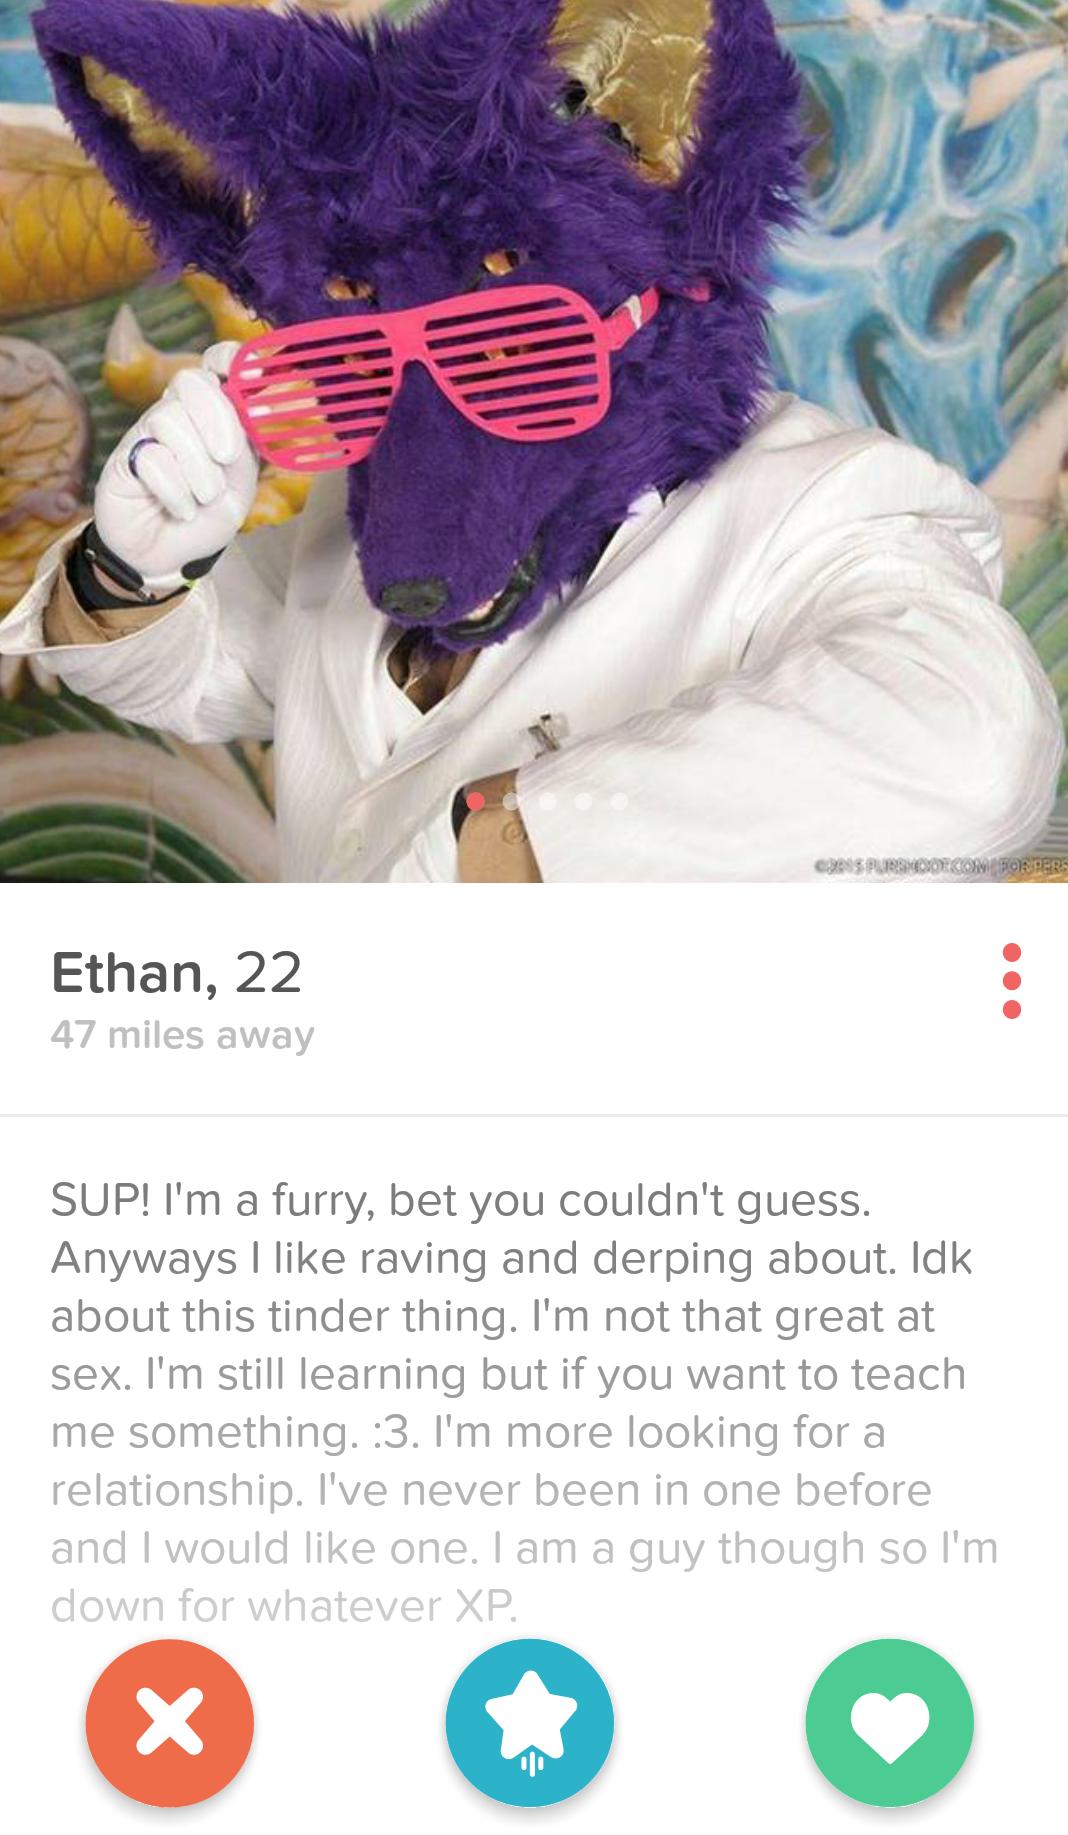 graphic design - Spuodecom Borders Ethan, 22 47 miles away Sup! I'm a furry, bet you couldn't guess. Anyways I raving and derping about. Idk about this tinder thing. I'm not that great at sex. I'm still learning but if you want to teach me something. 3. I